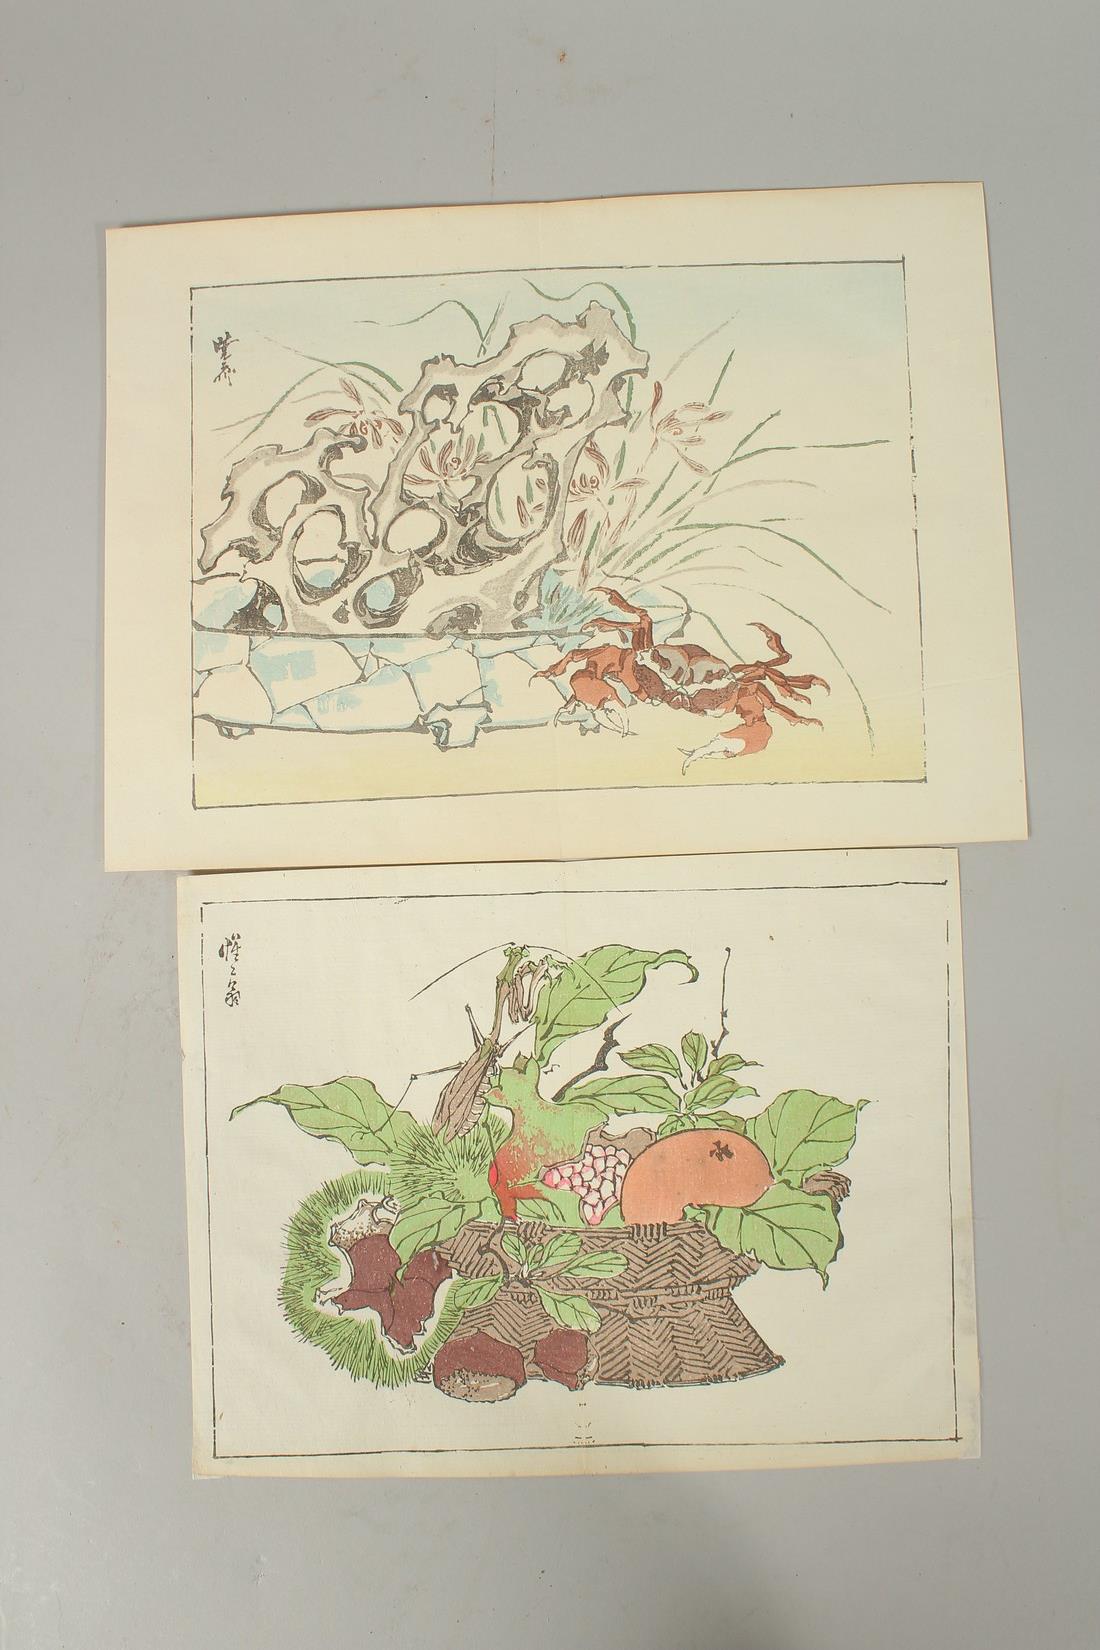 KYOSAI KAWANABE (1831-1889): FROM THE SERIES OF KYOSAI'S DRAWINGS, two late 19th century original